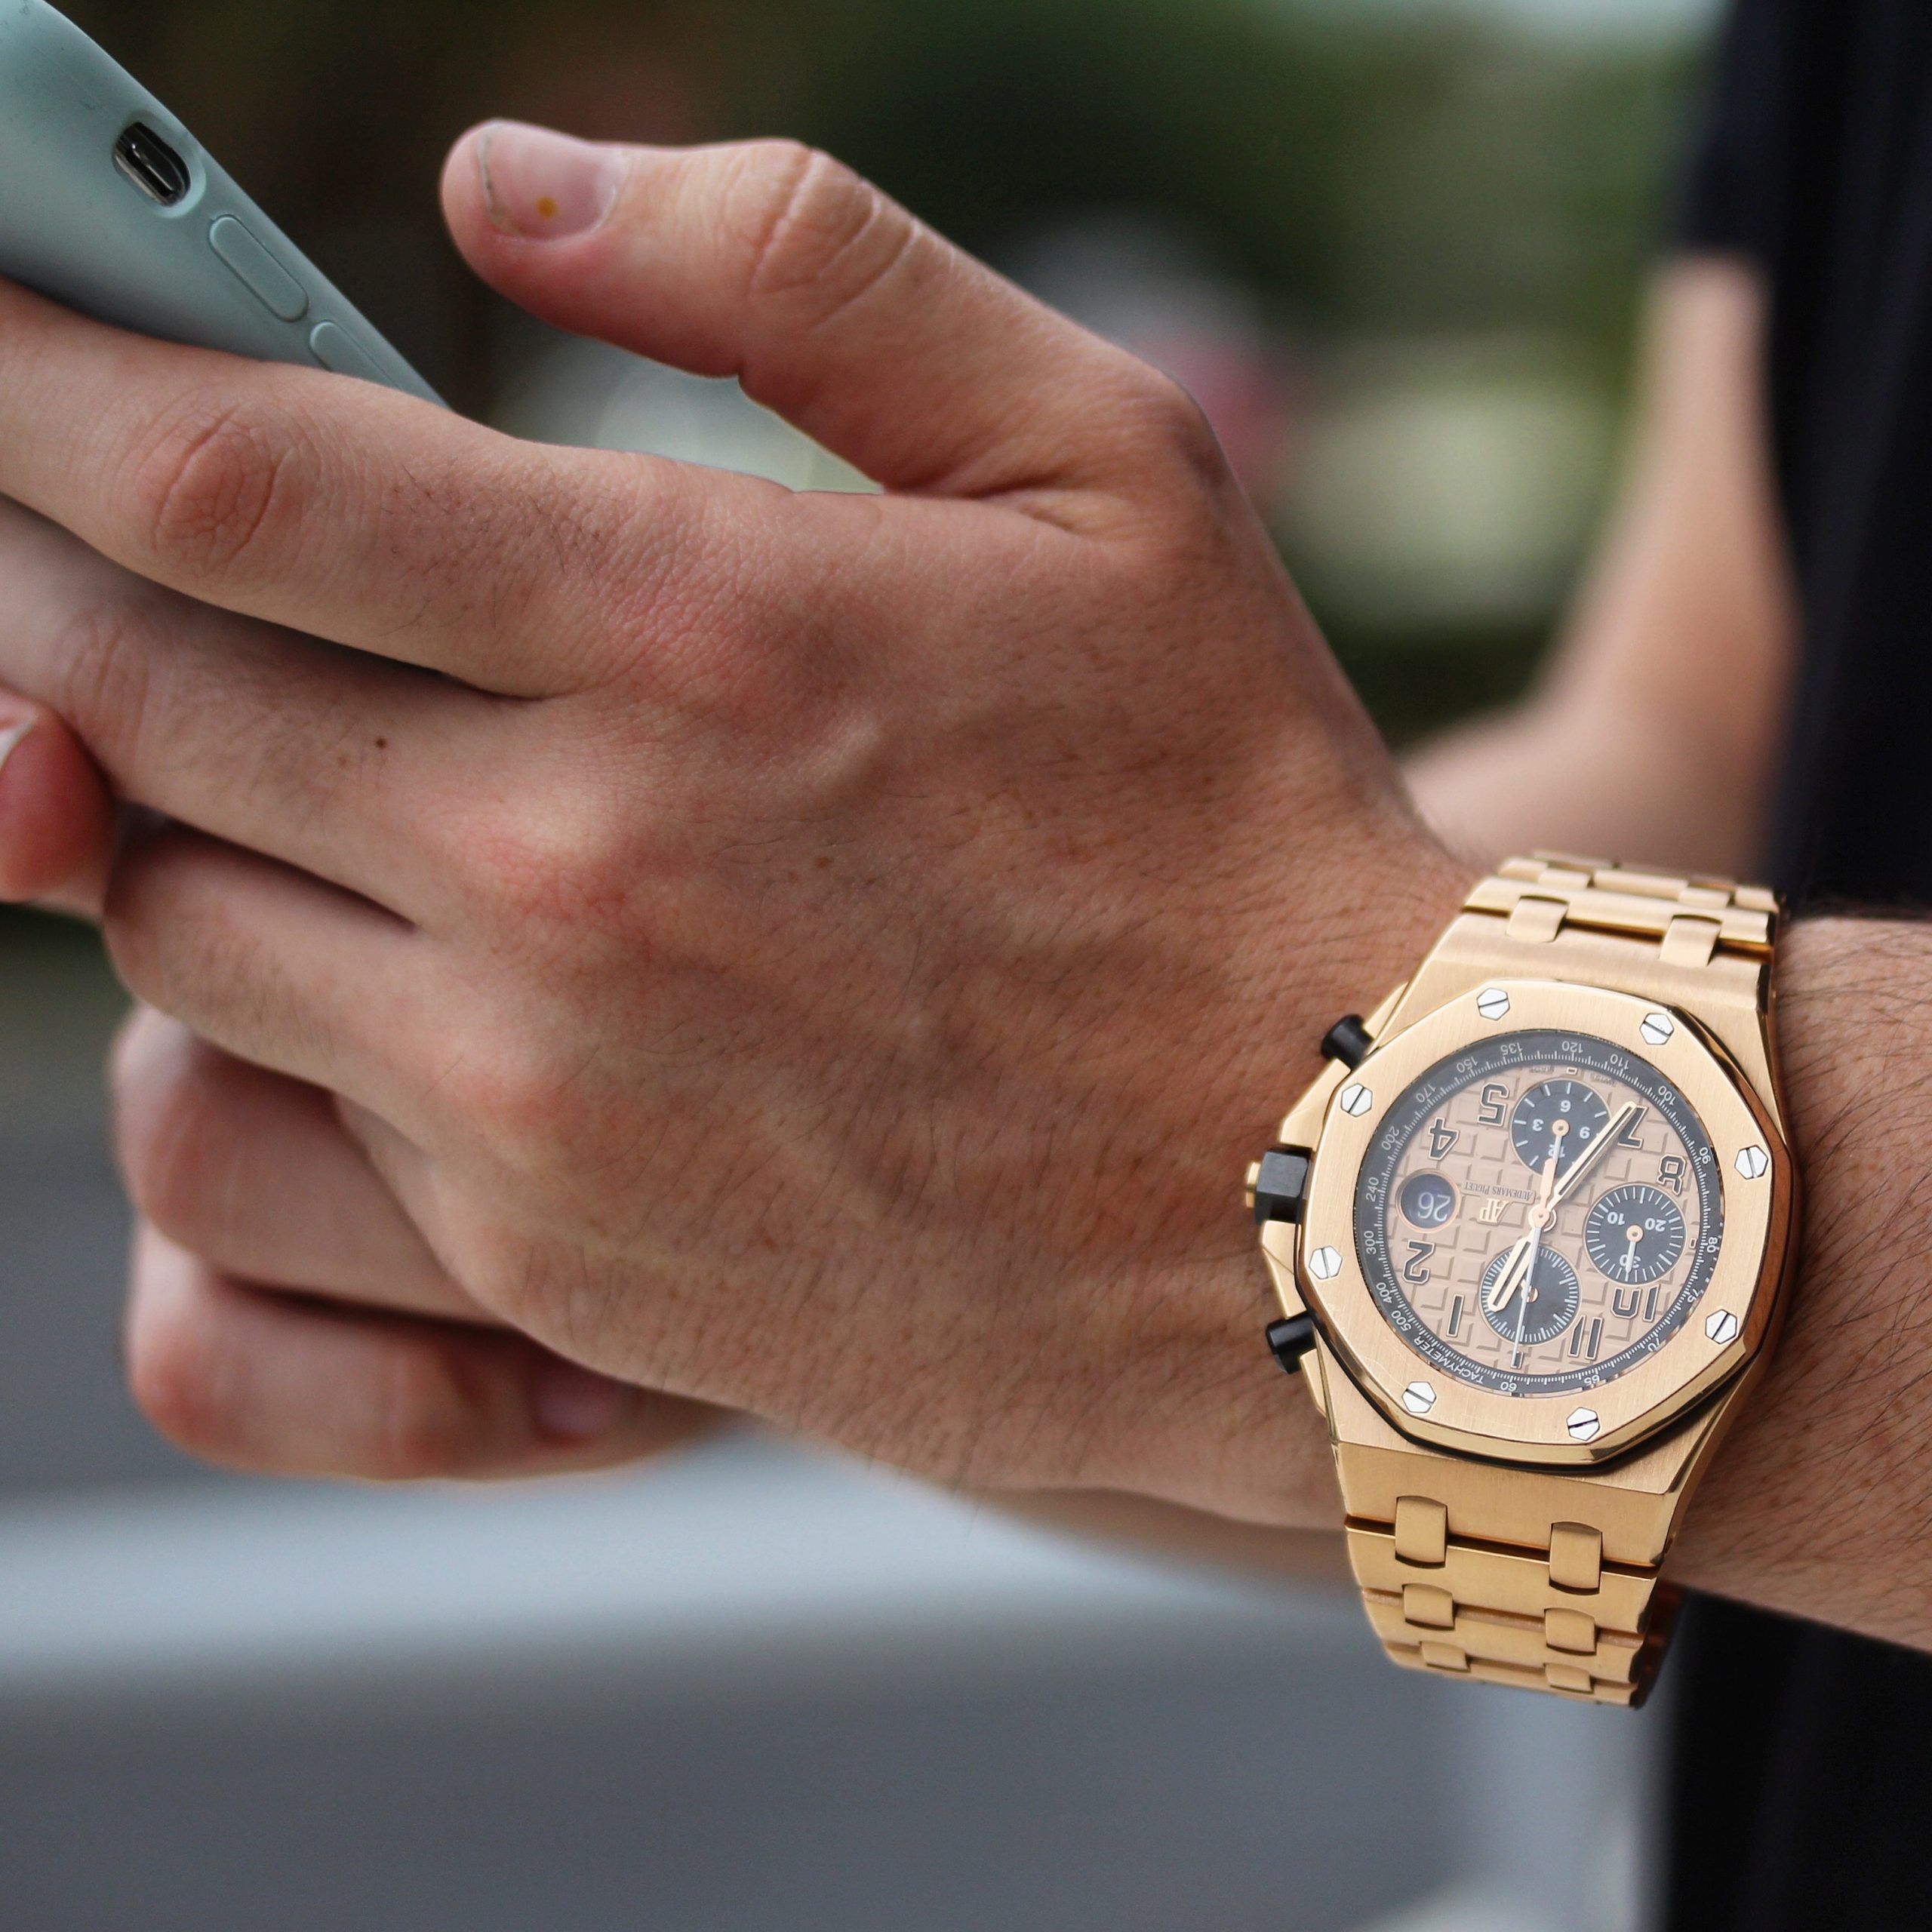 Luxury watch vs smartwatch (plus which one to buy)